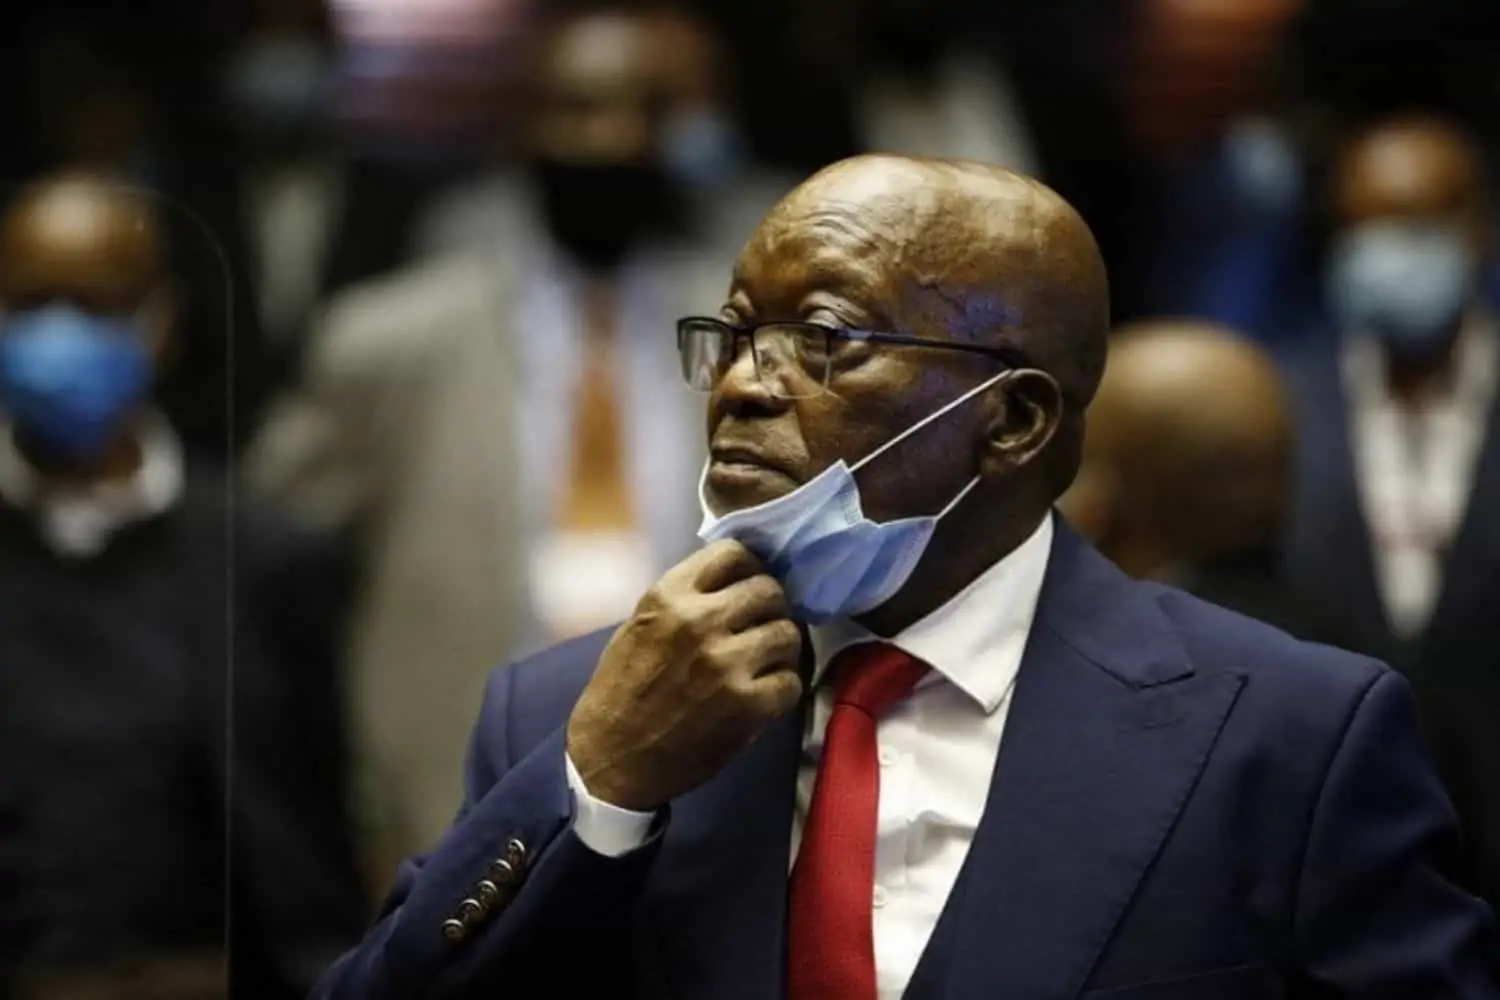 Jacob Zuma is granted leave so that his return to prison ruling can be appealed